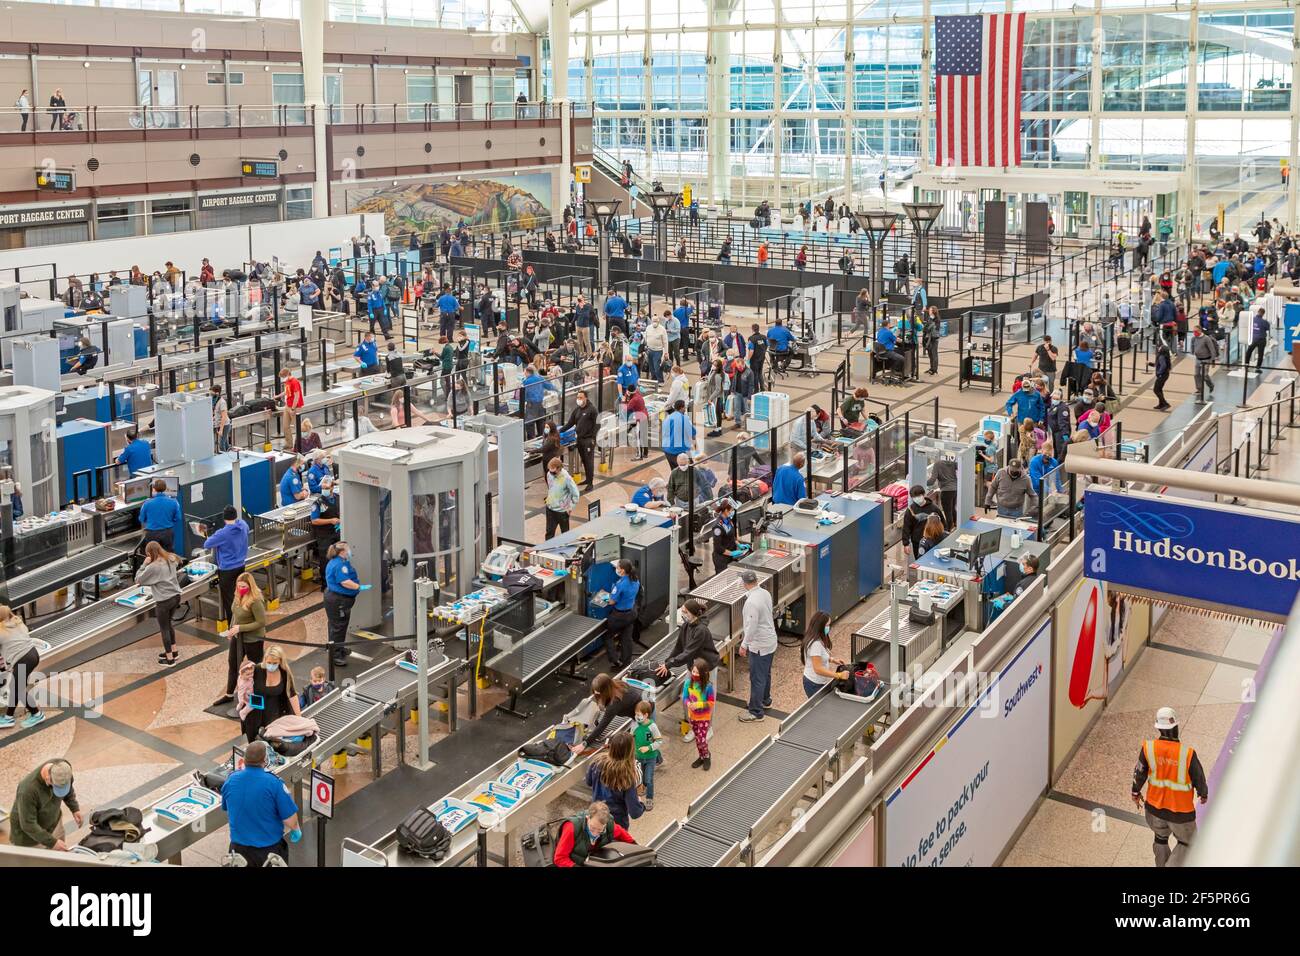 Denver, Colorado - Security screening of passengers at Denver International Airport. Travel has increased with Americans' hope that the coronavirus pa Stock Photo